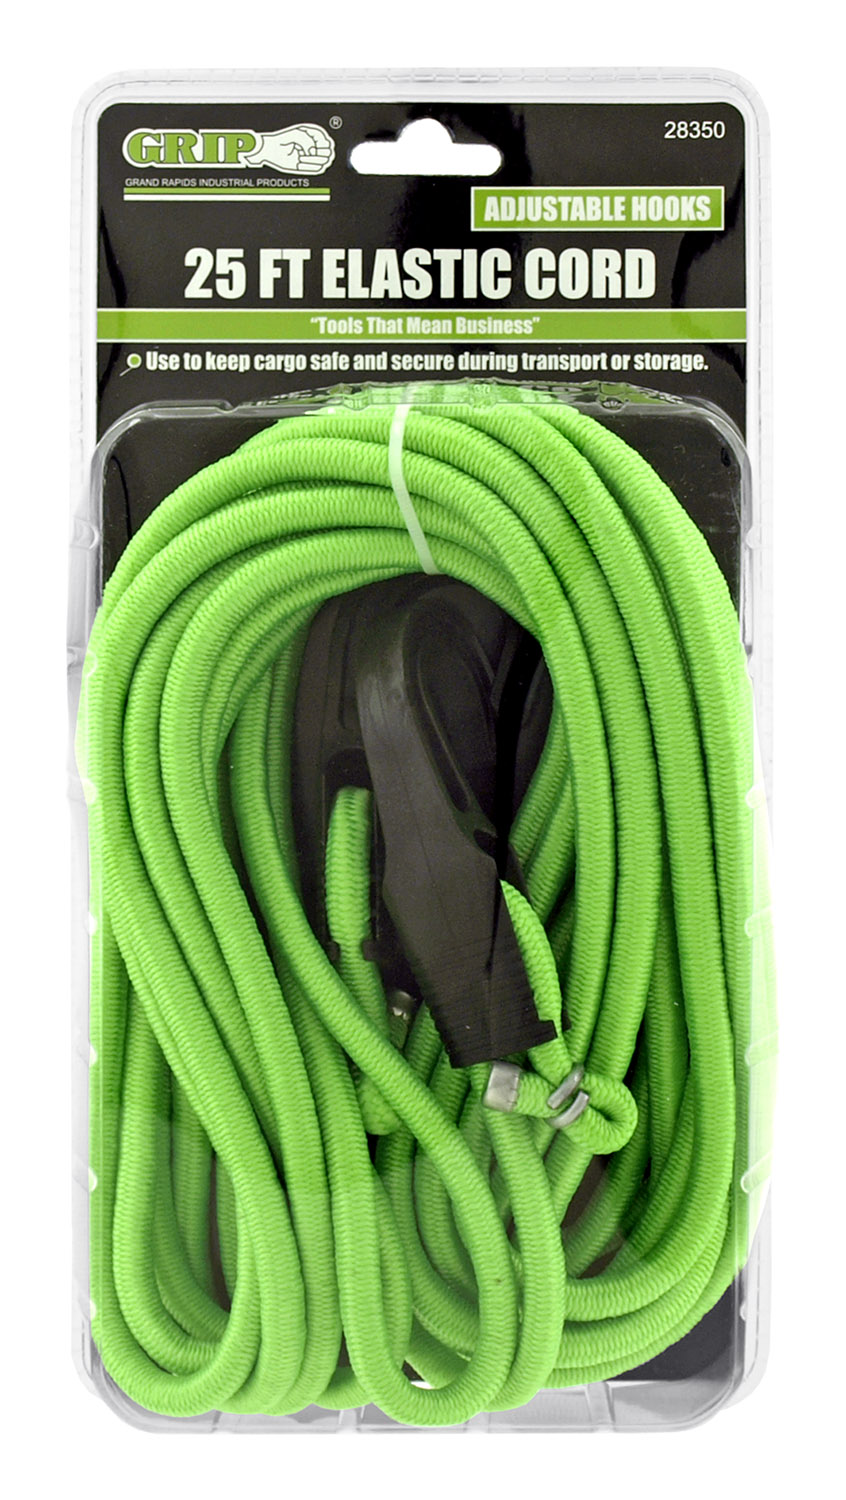 25 ft E$lastic Cord Bunji Cord Tie Down with Adjustable Non Marring Hooks 